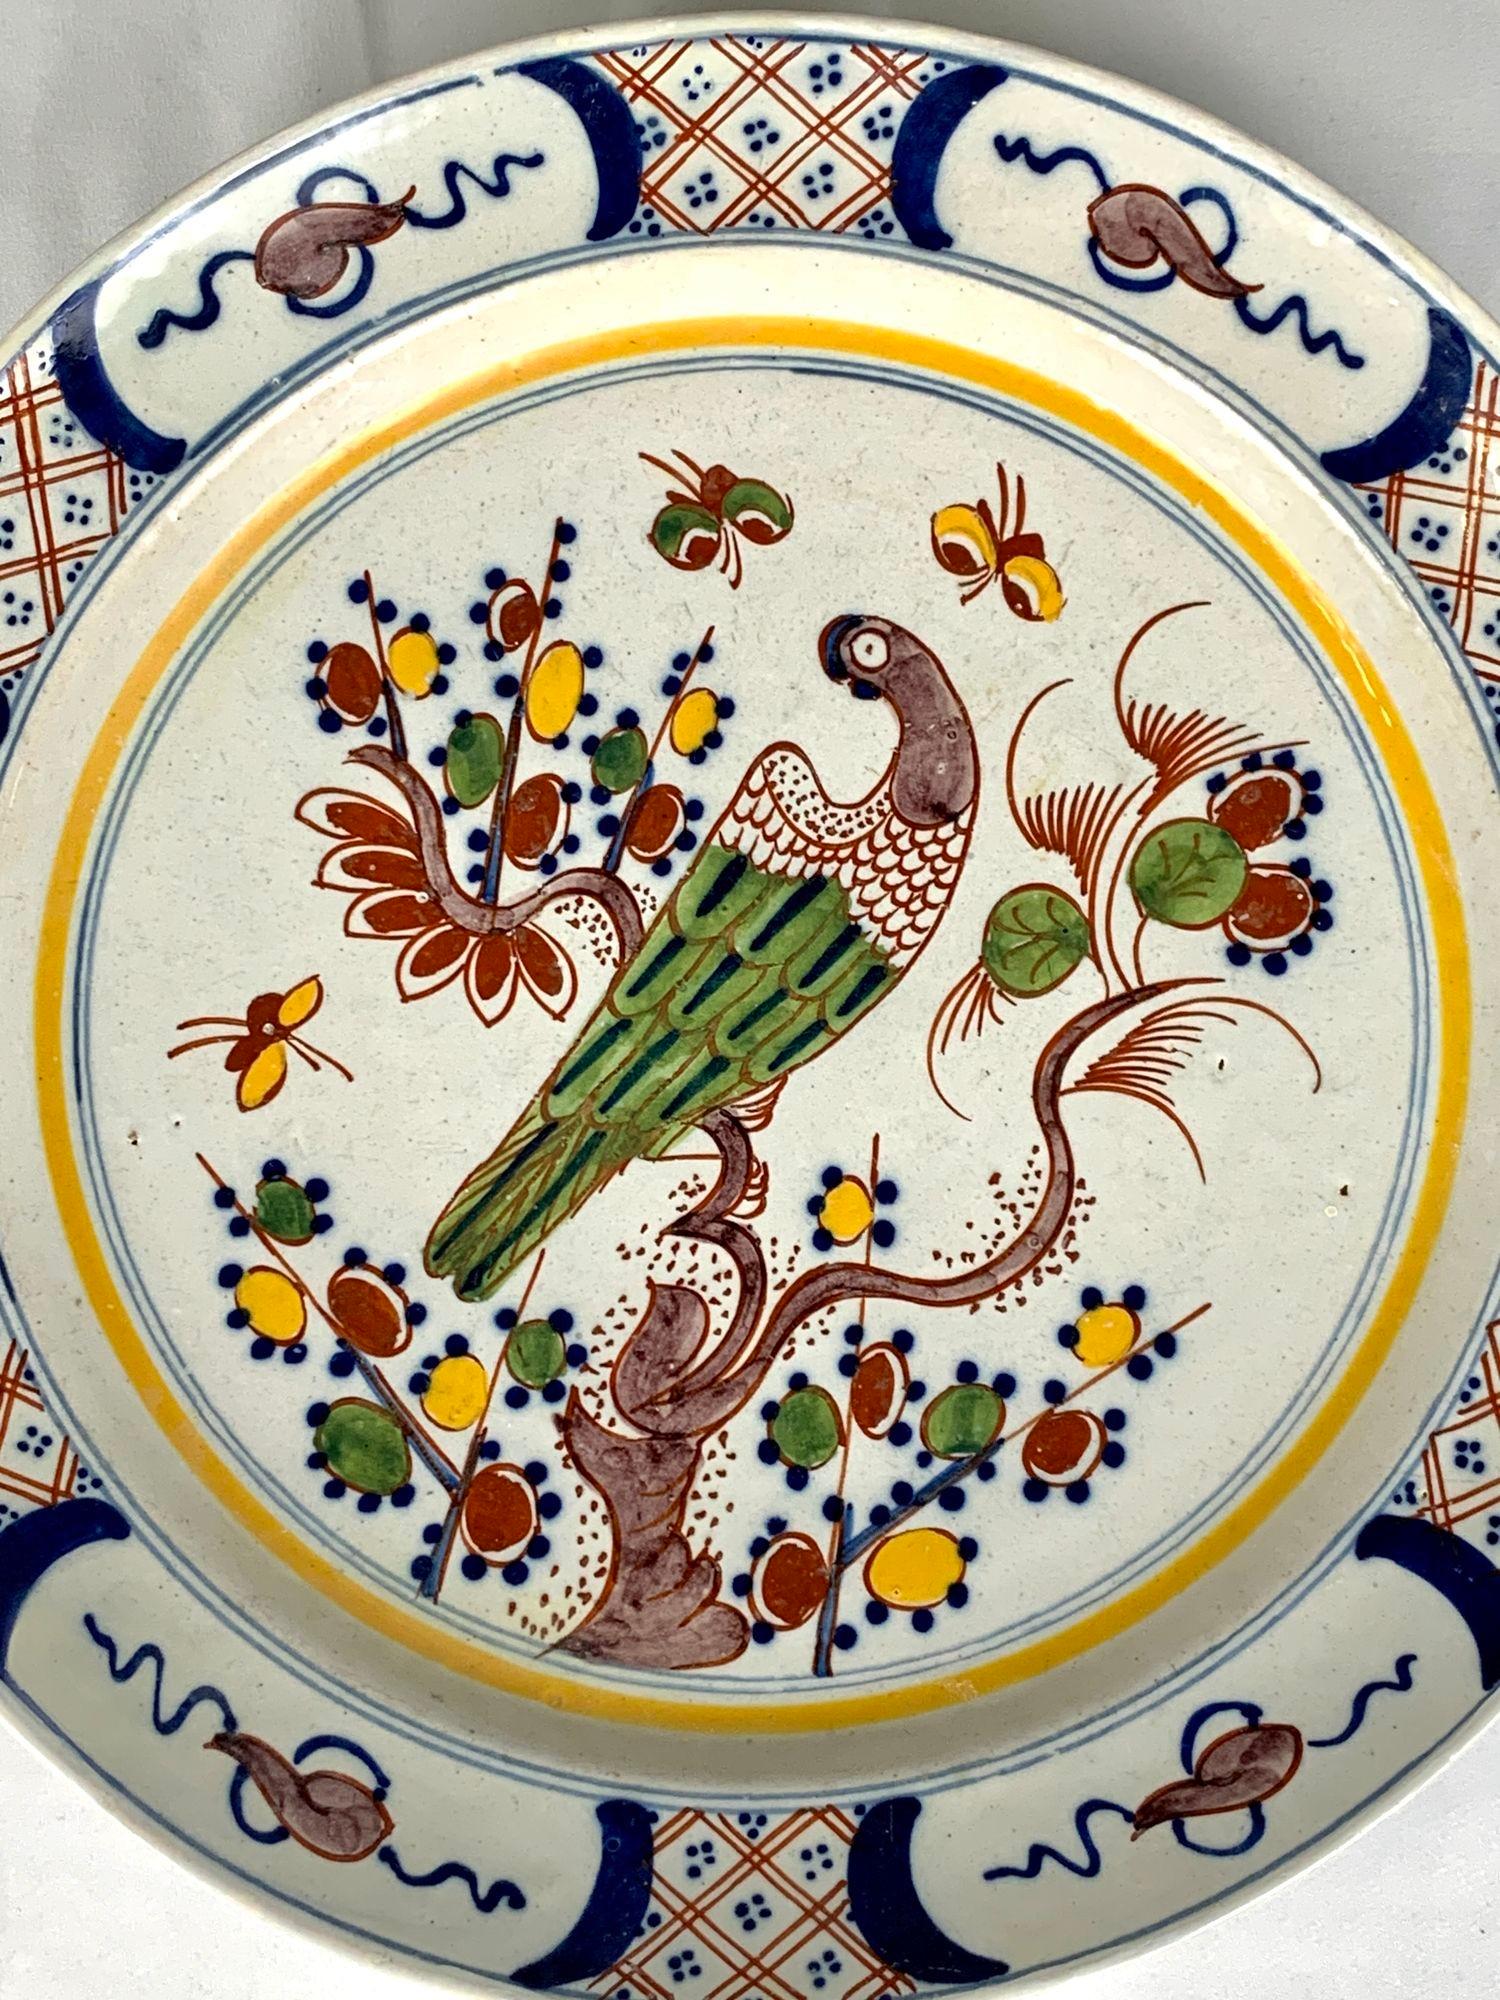 This 18th century Dutch Delft charger features a vibrant array of polychrome colors; yellow, green, blue manganese, and iron red.
The intensity of the colors is exquisite. The colors pop!
We see a beautiful songbird settled on a flowering tree